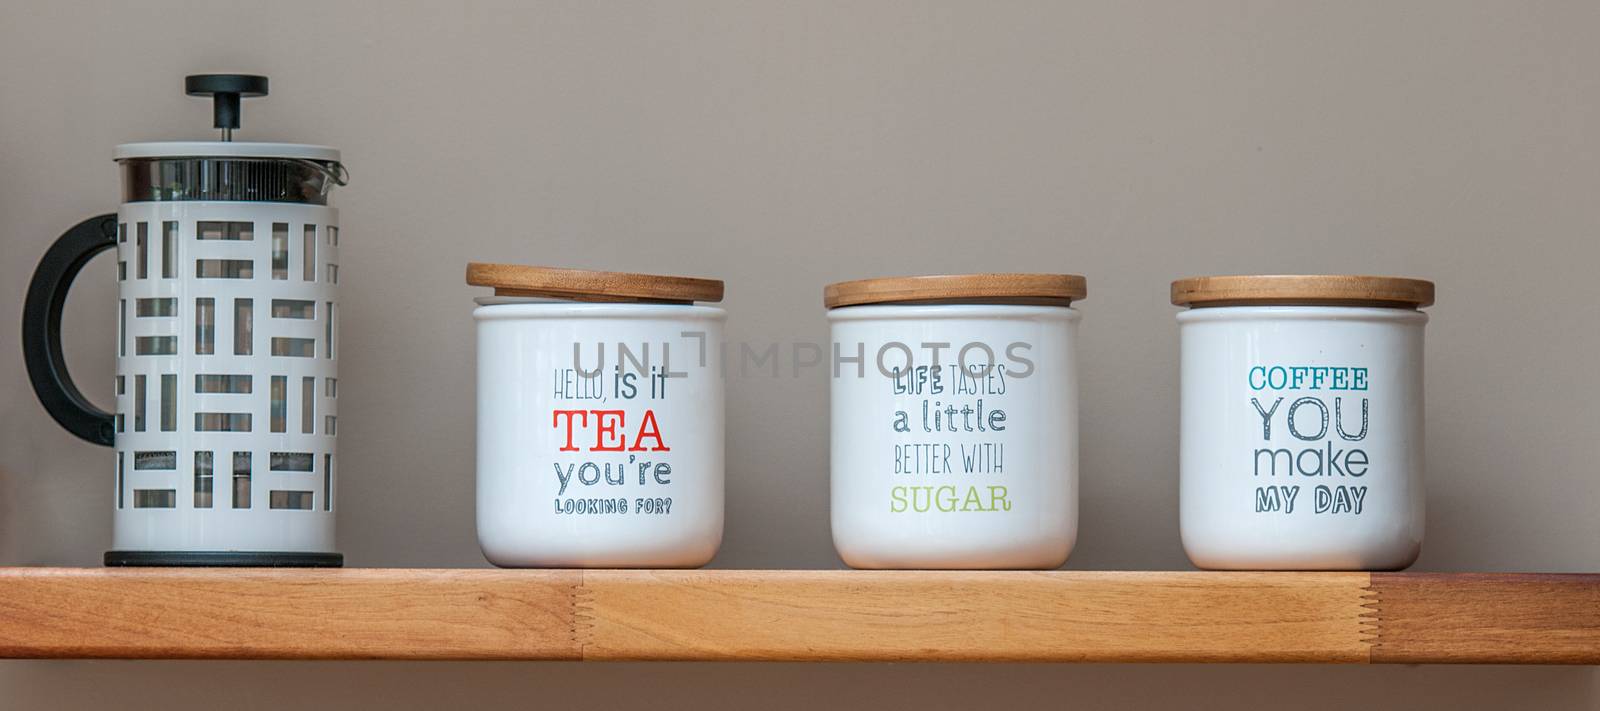 tea and coffee storage jars and a coffee plunger on a wooden shelf by sirspread